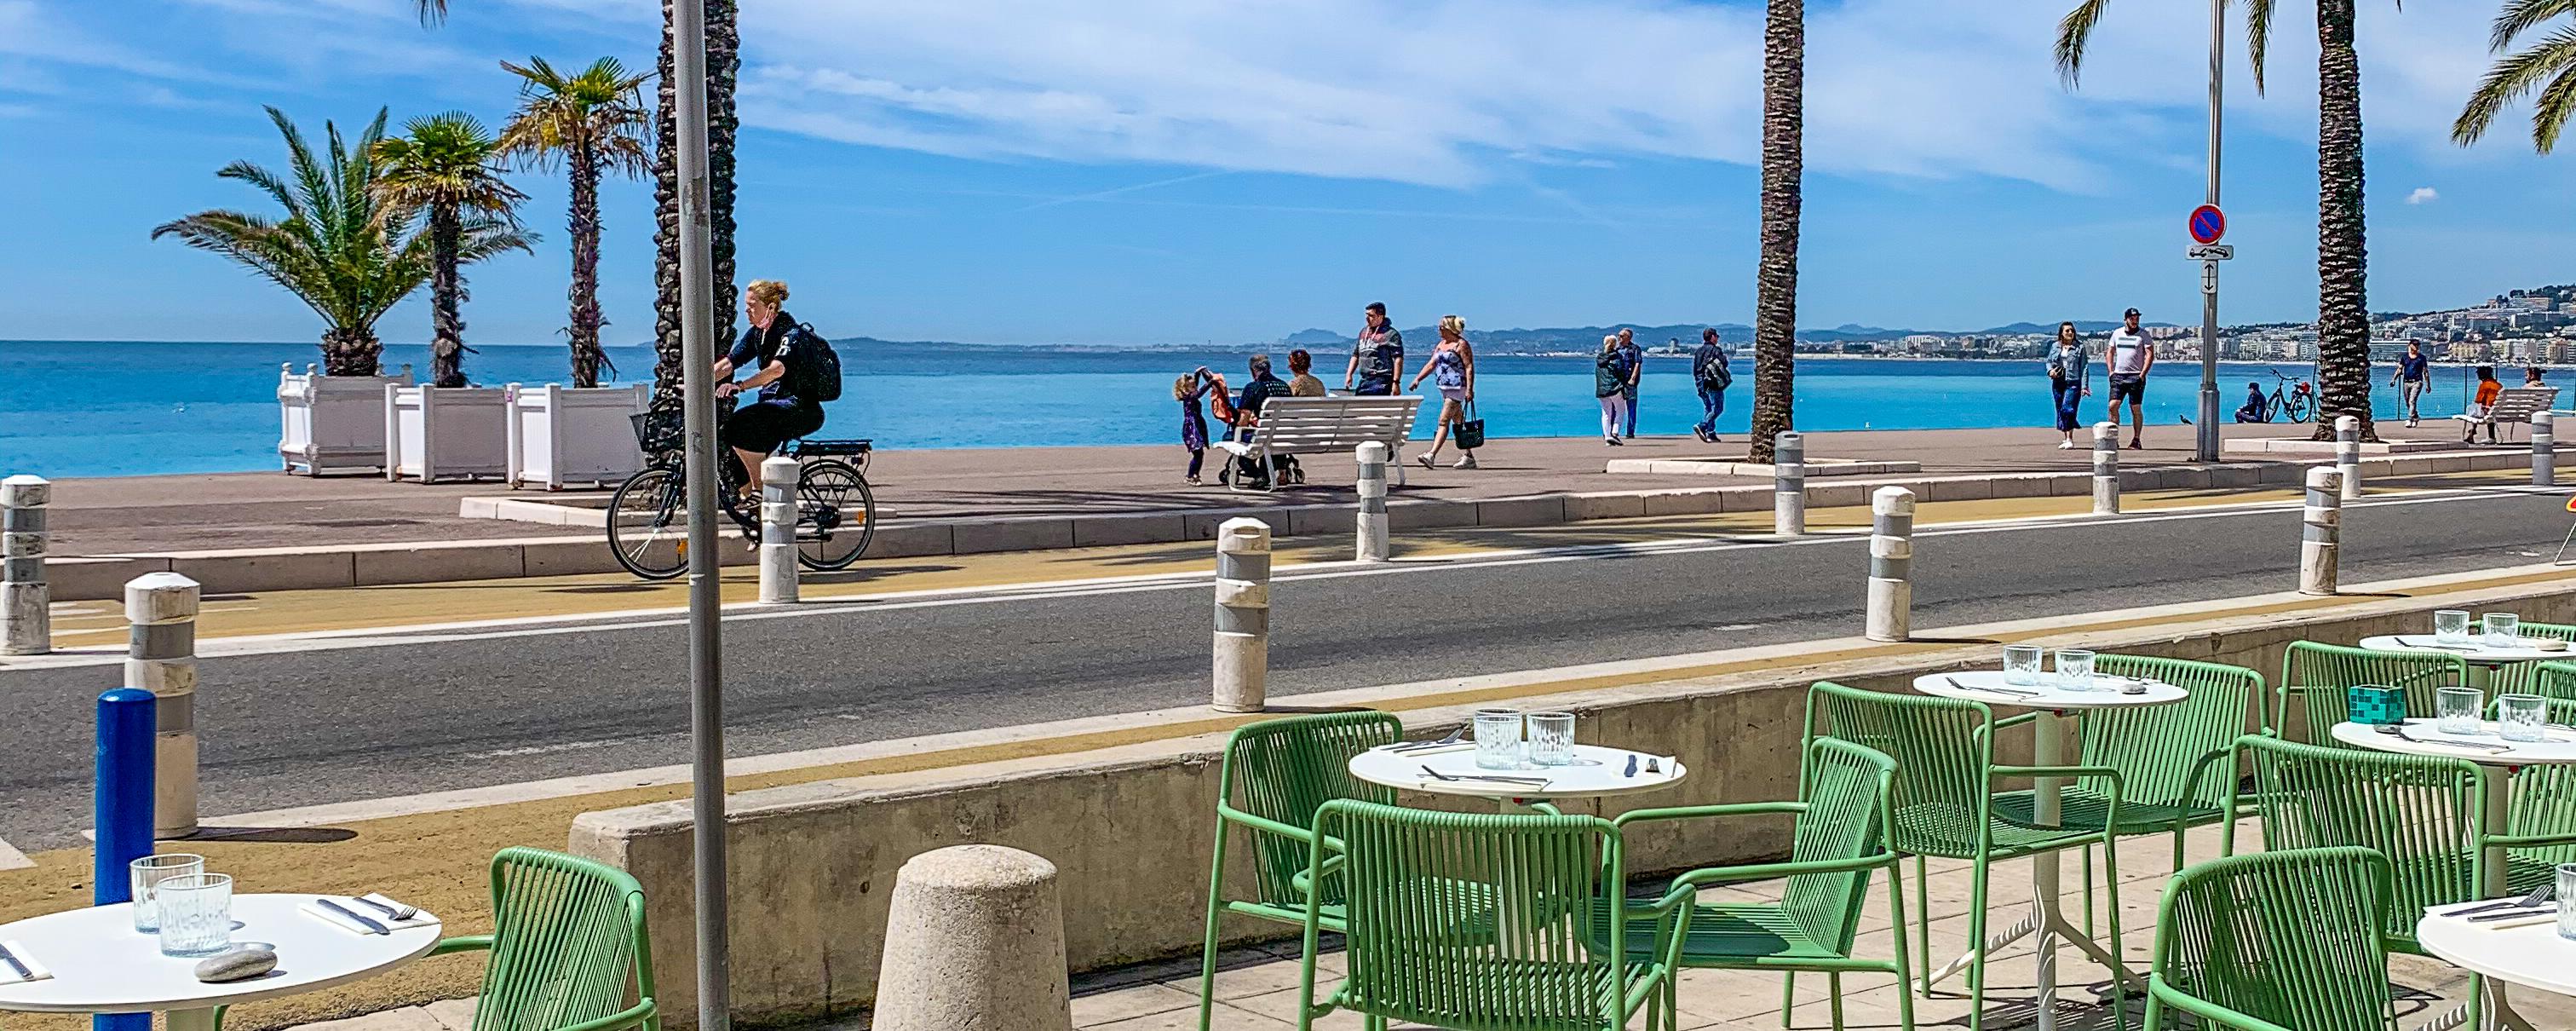 10 bars for nights out in Nice